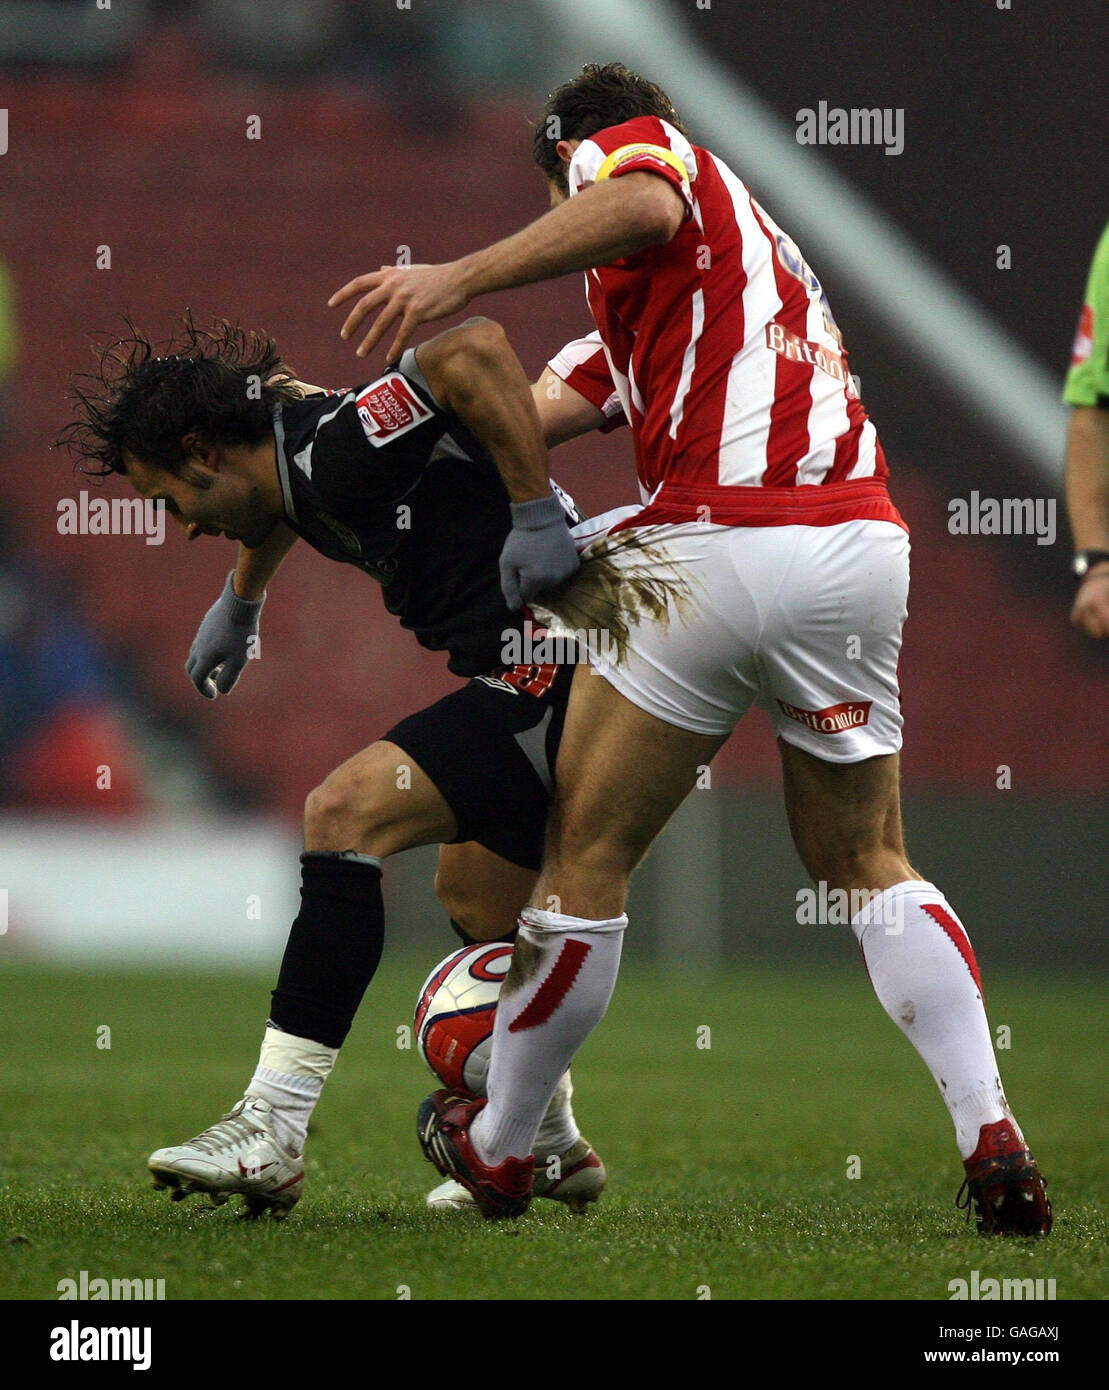 Stoke City's John Eustace and West Bromwich Albion's Filipe Teixeira tussle during the Coca-Cola Football League Championship match at the Britannia Stadium, Stoke-on-Trent. Stock Photo